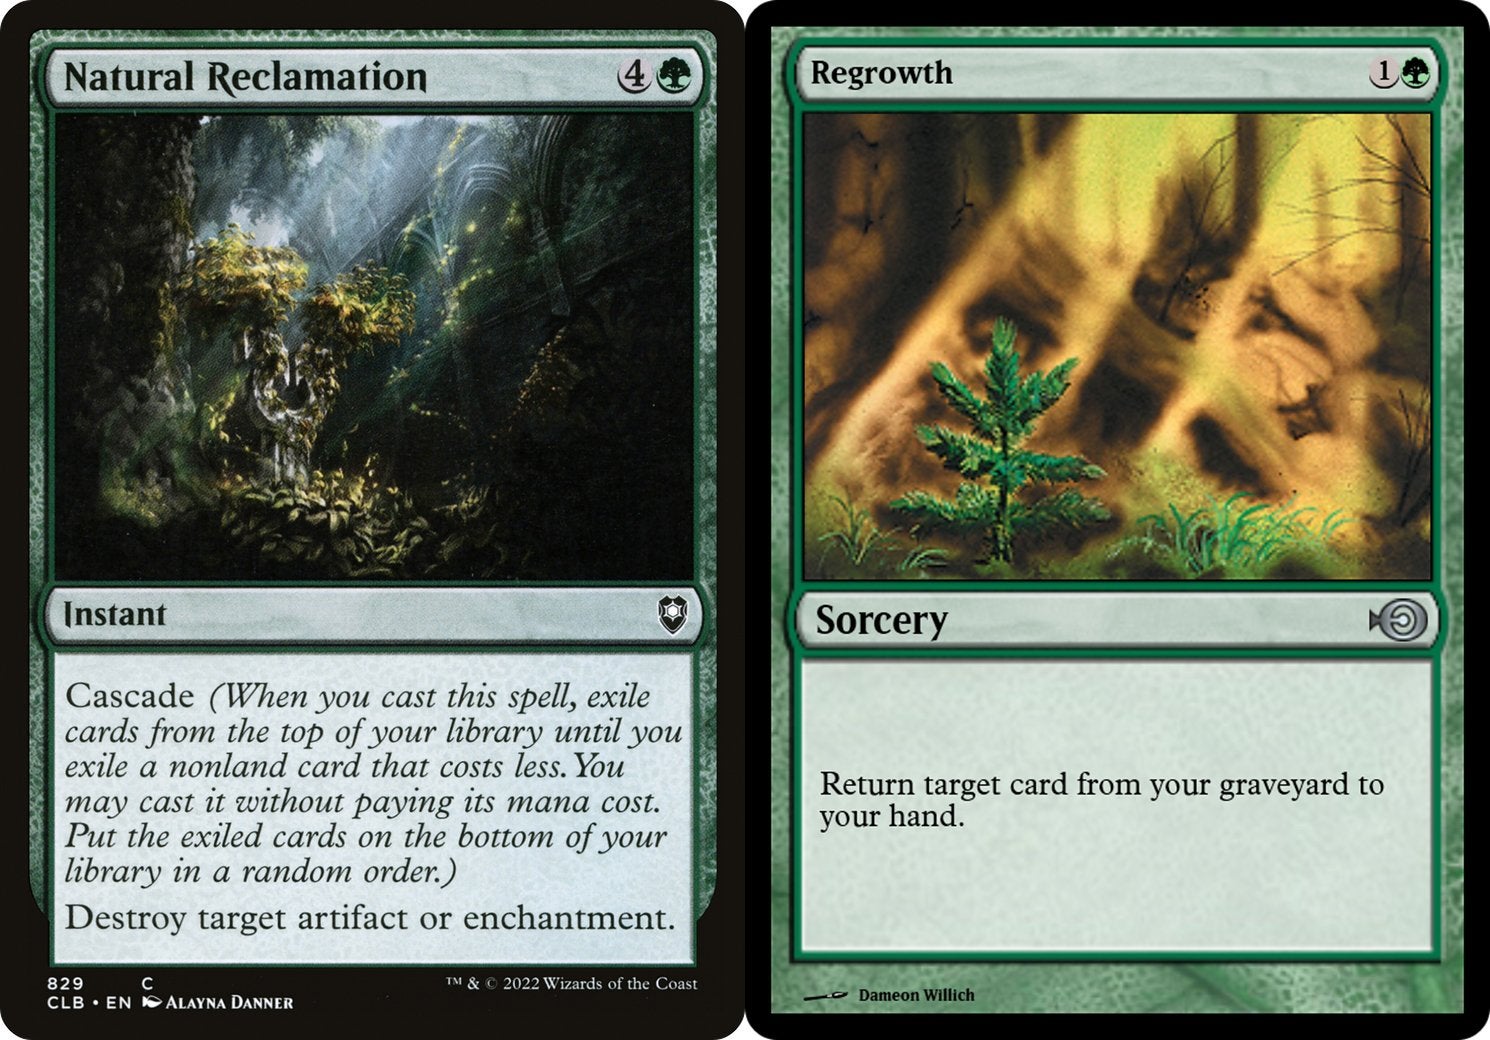 A green Instant with Cascade and a green Sorcery that returns a card from the graveyard to your hand.